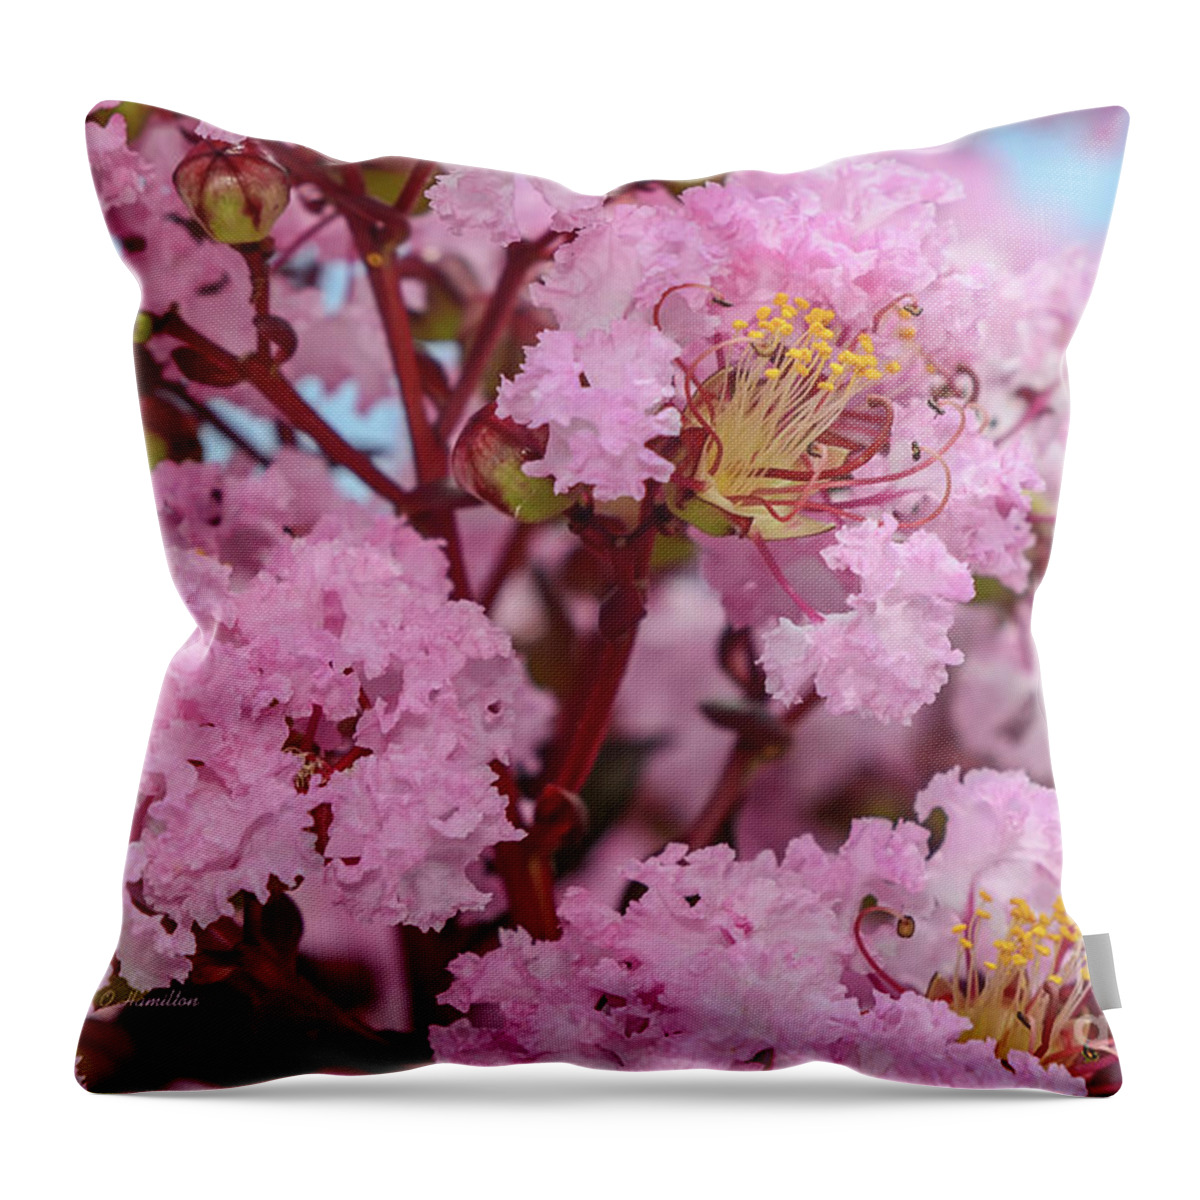 Crepe Myrtle Throw Pillow featuring the photograph Crepe Myrtle Flowers by Olga Hamilton